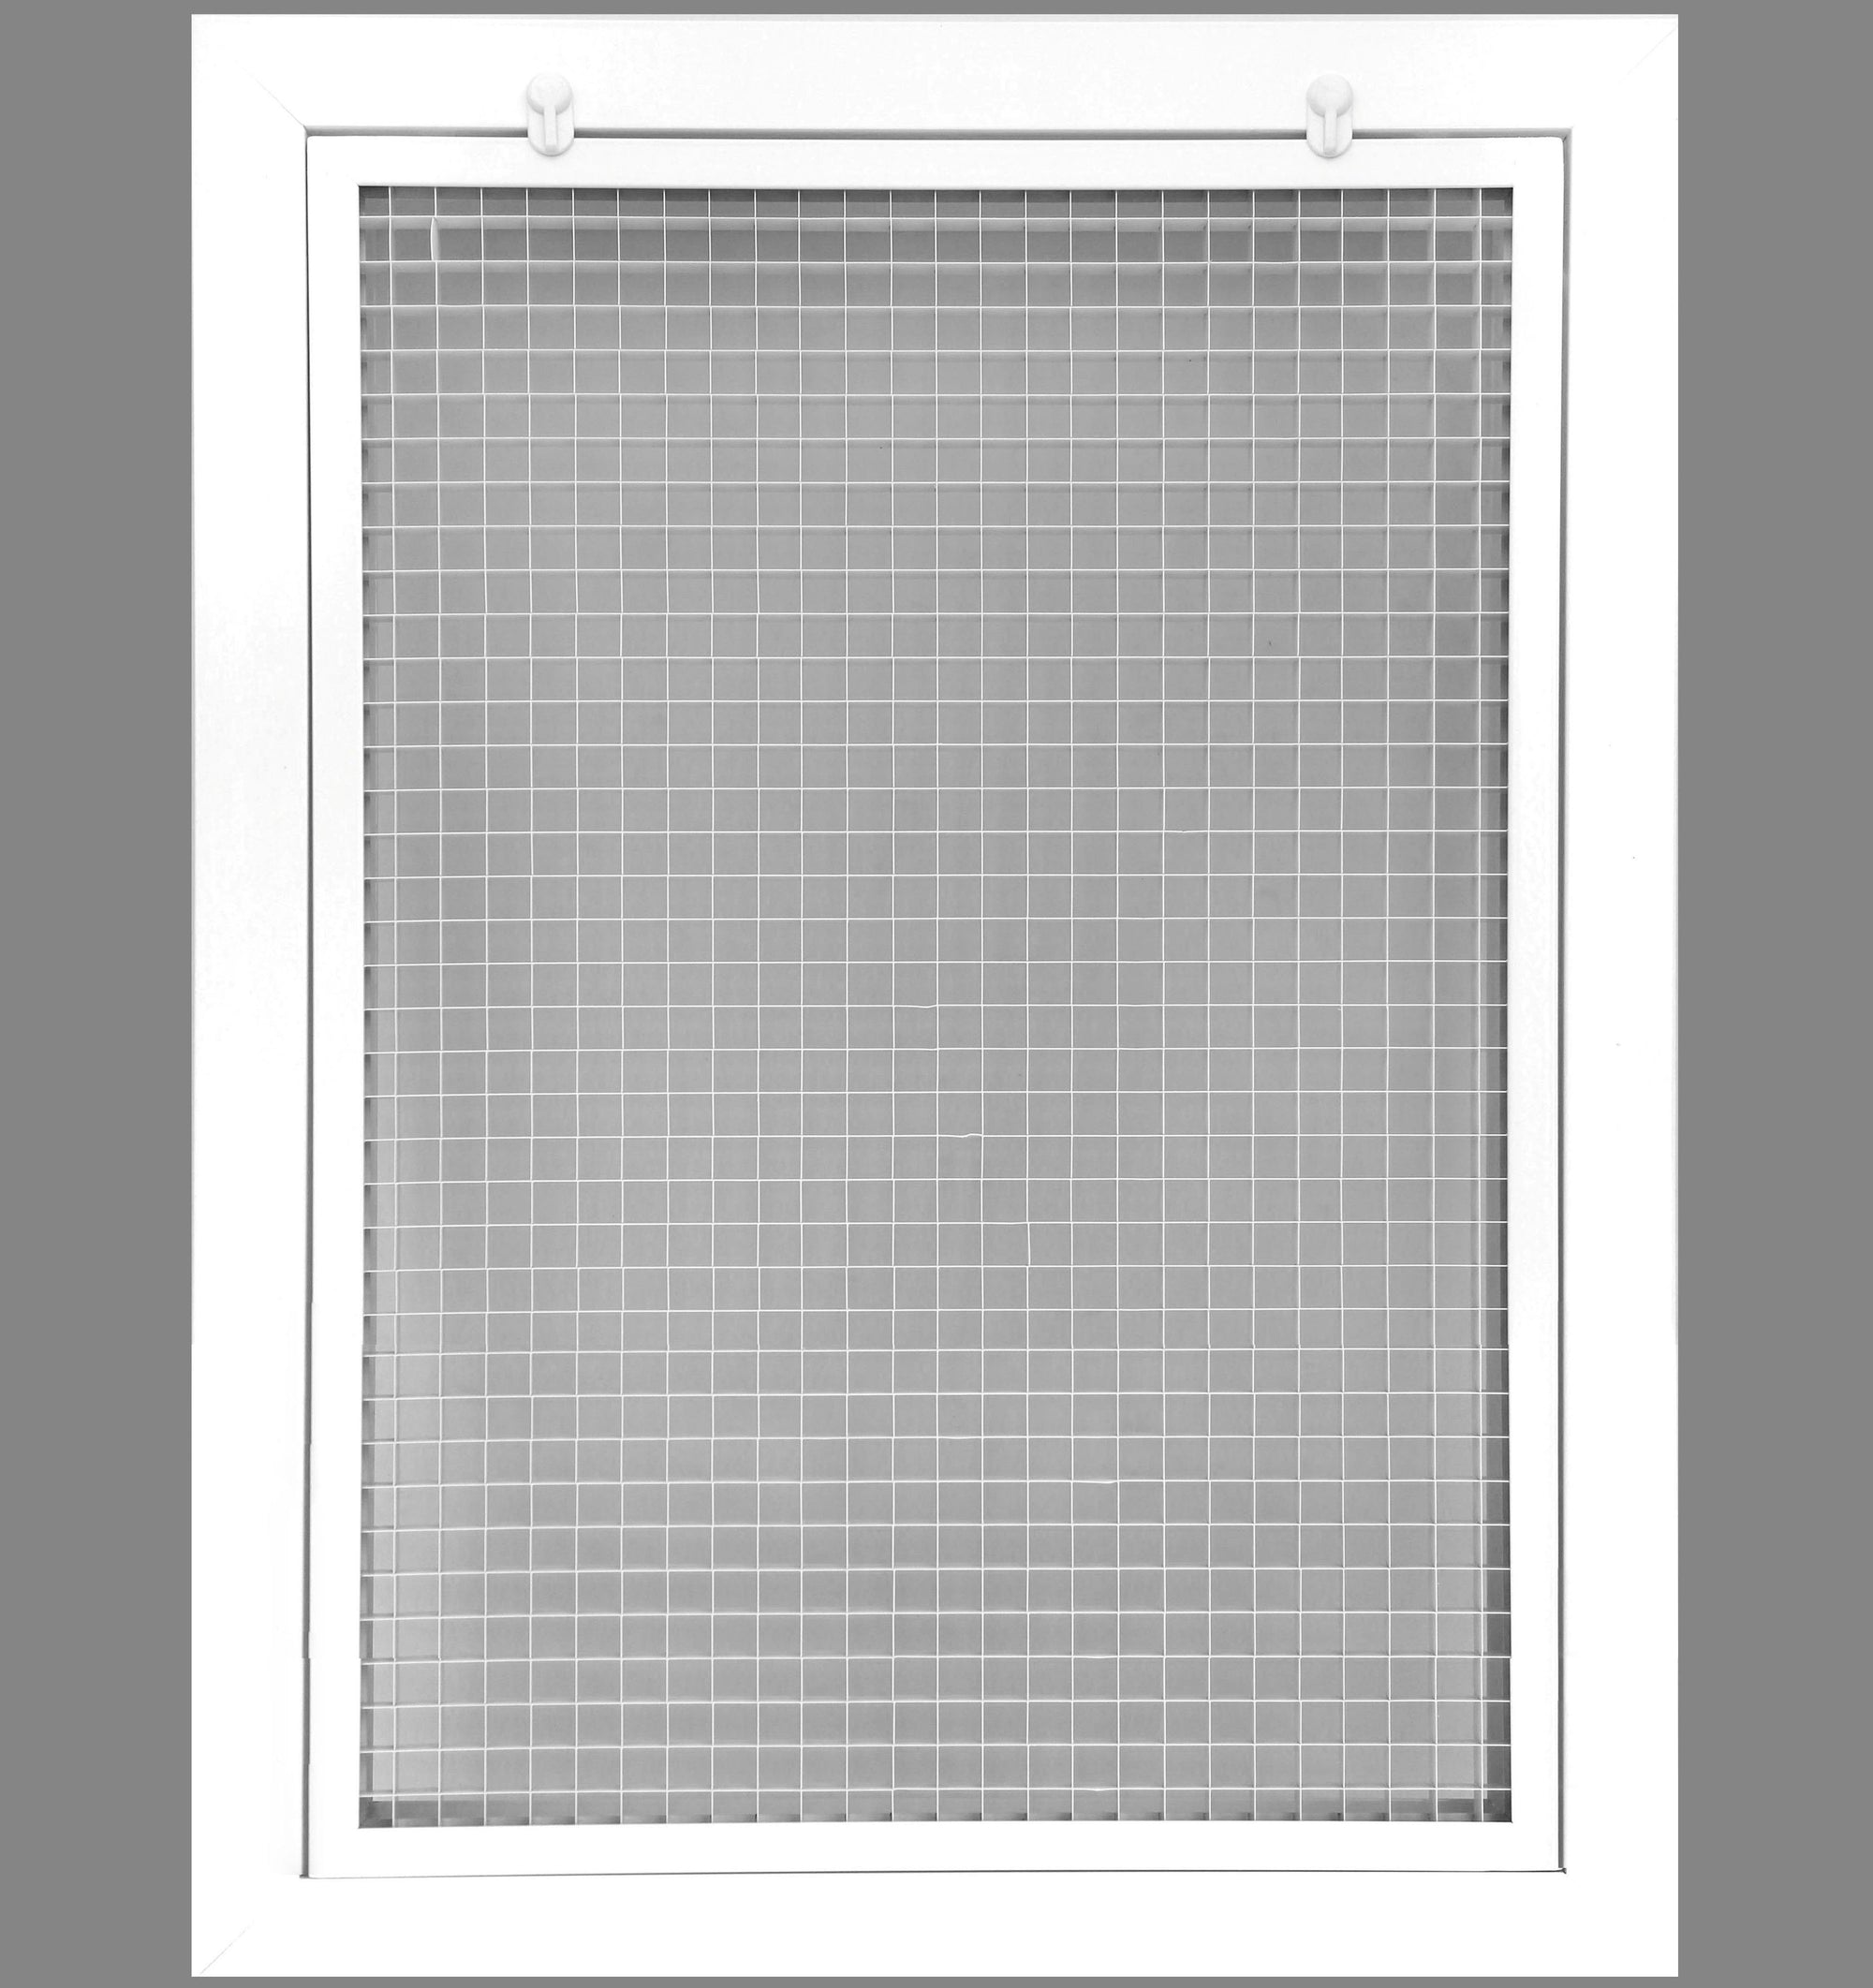 16" x 24" Cube Core Eggcrate Return Air Filter Grille for 1" Filter